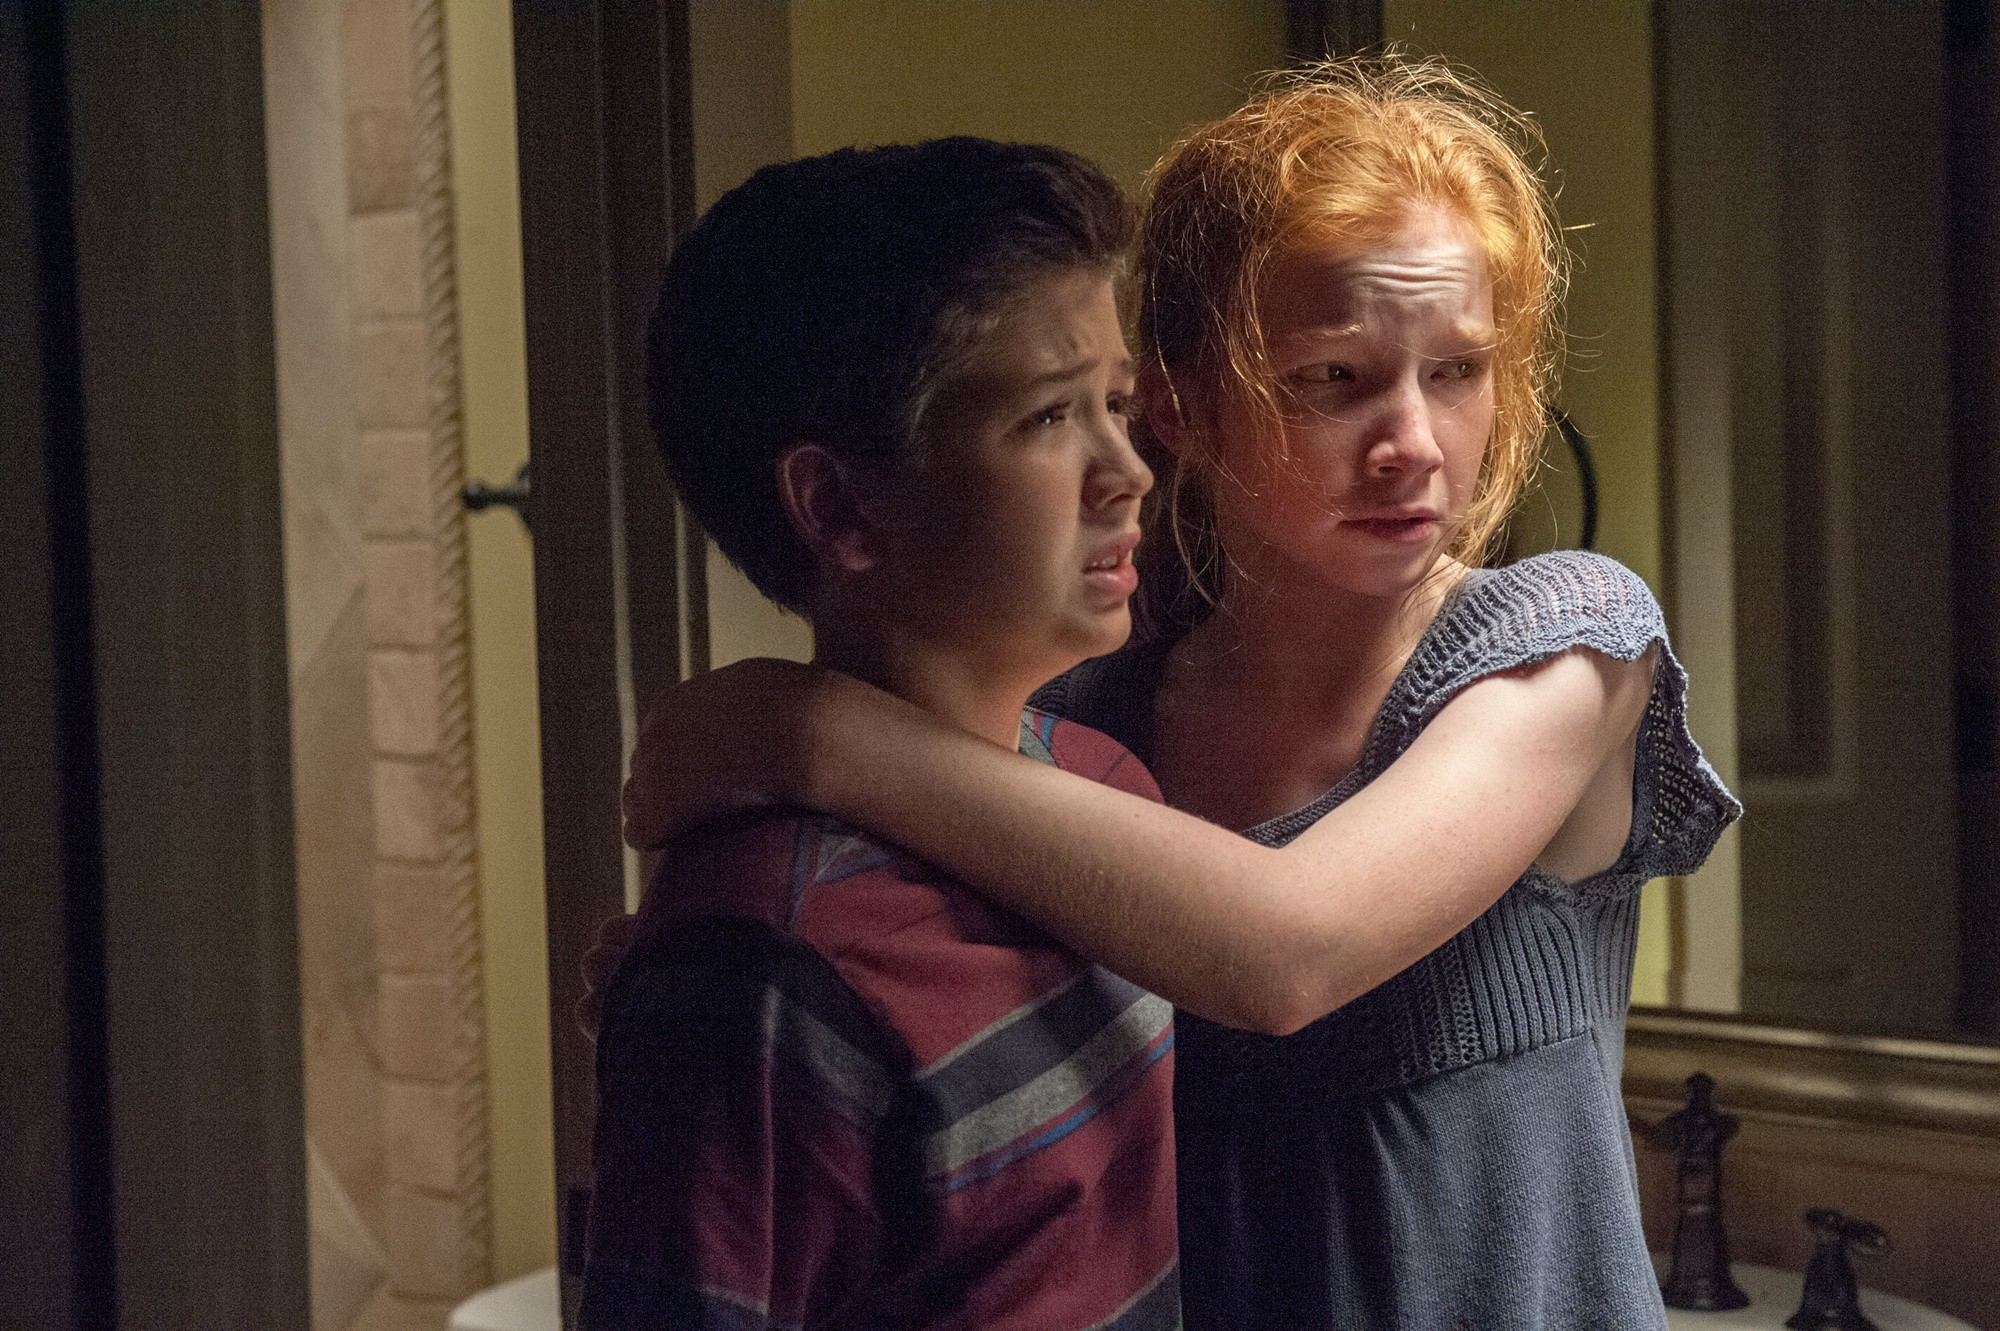 Garrett Ryan stars as Young Tim Russell and Annalise Basso stars as Young Kaylie Russell in Relativity Media's Oculus (2014)